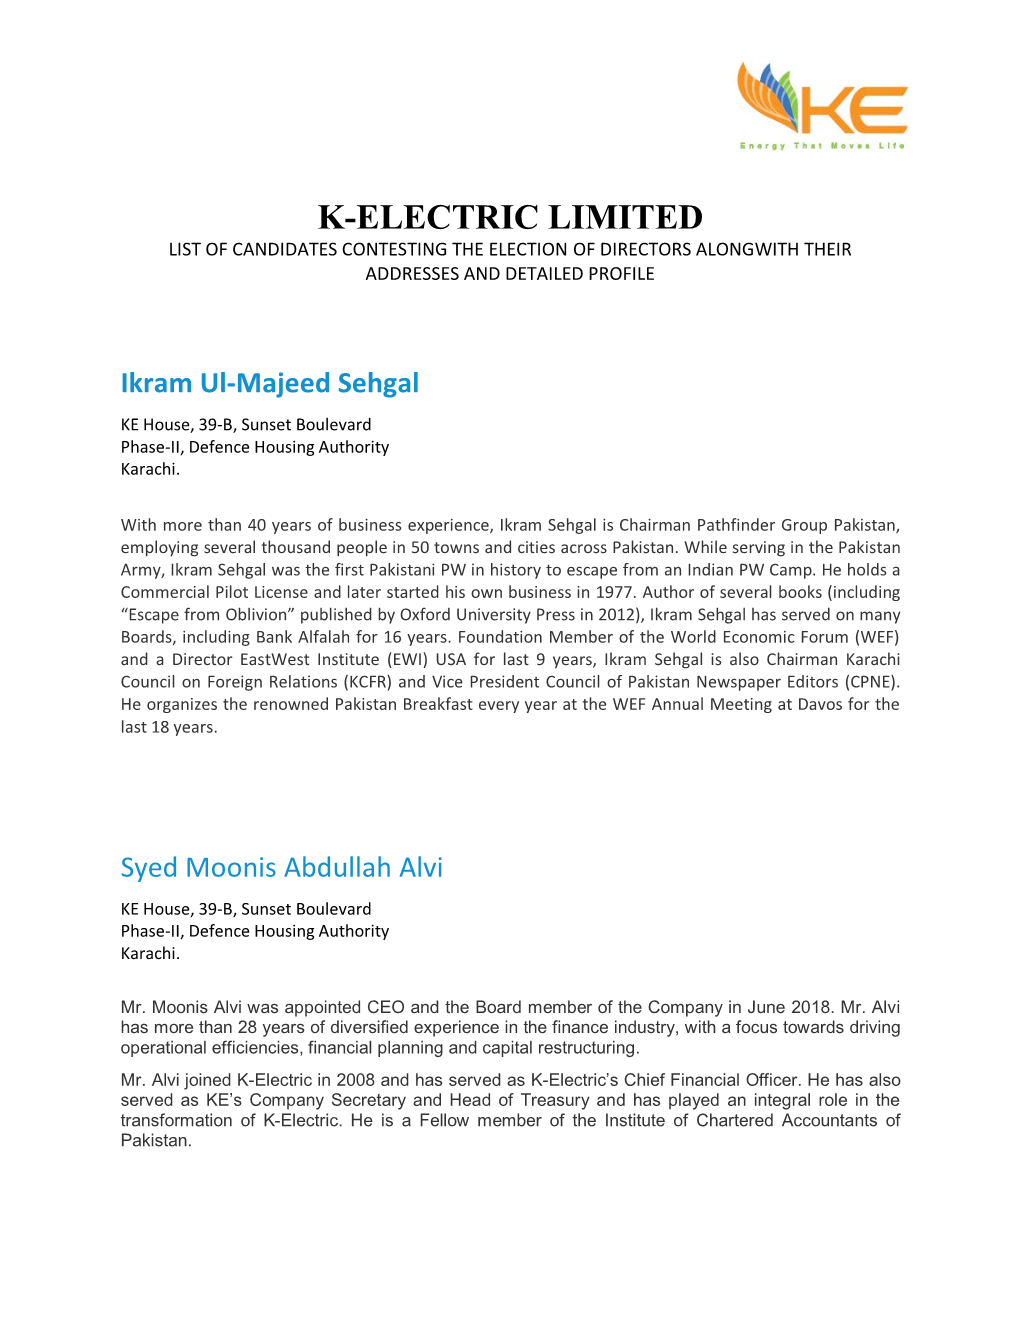 K-Electric Limited List of Candidates Contesting the Election of Directors Alongwith Their Addresses and Detailed Profile